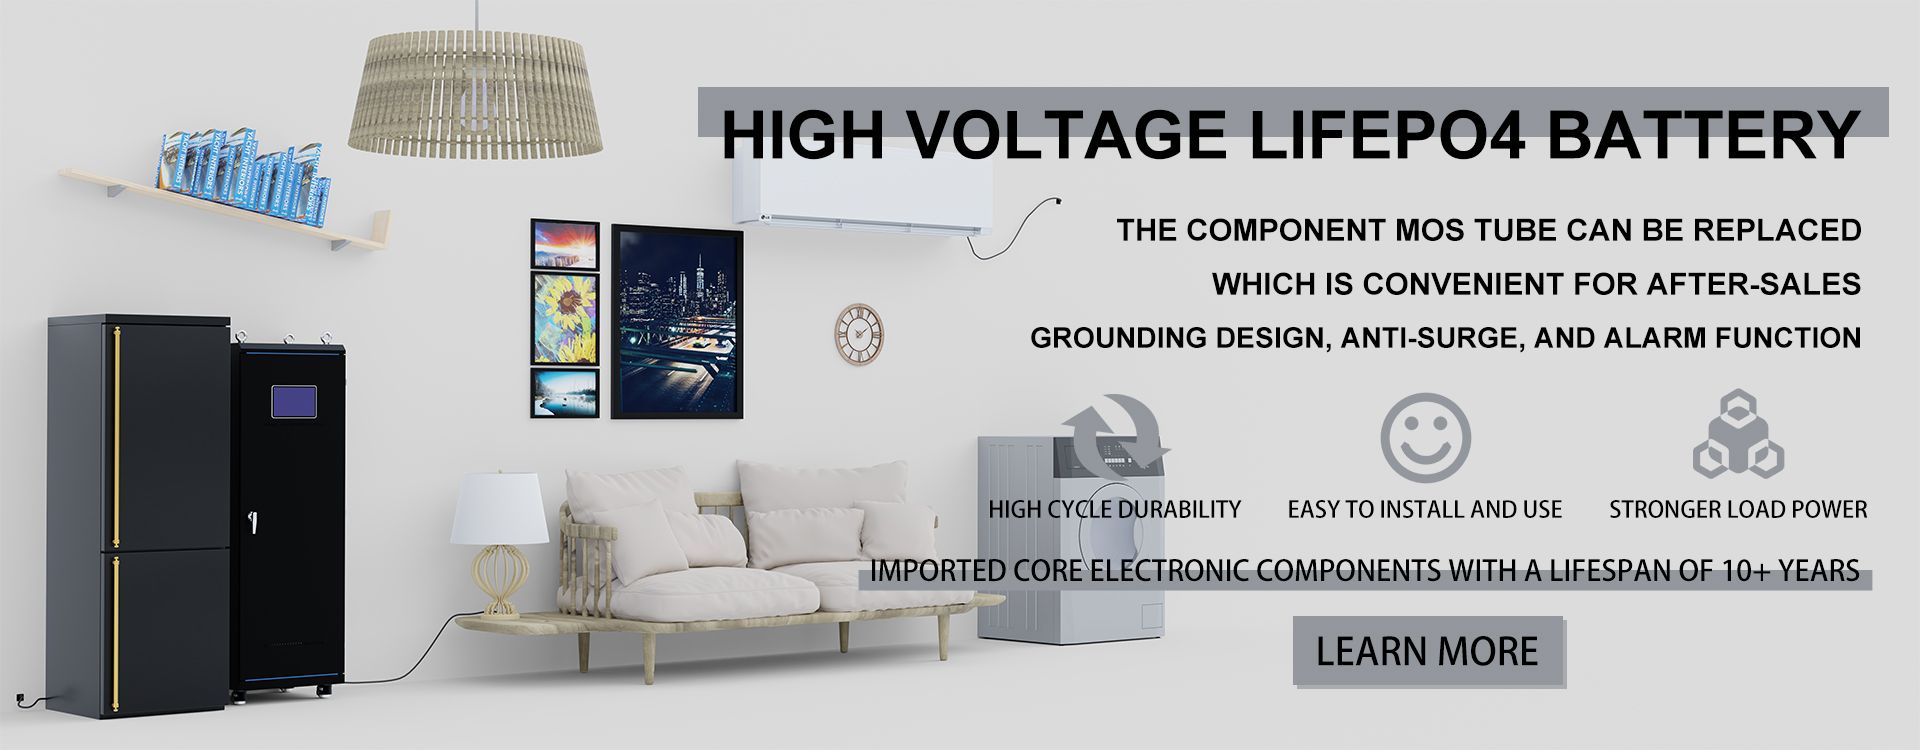 High Voltage Lifepo4 Battery